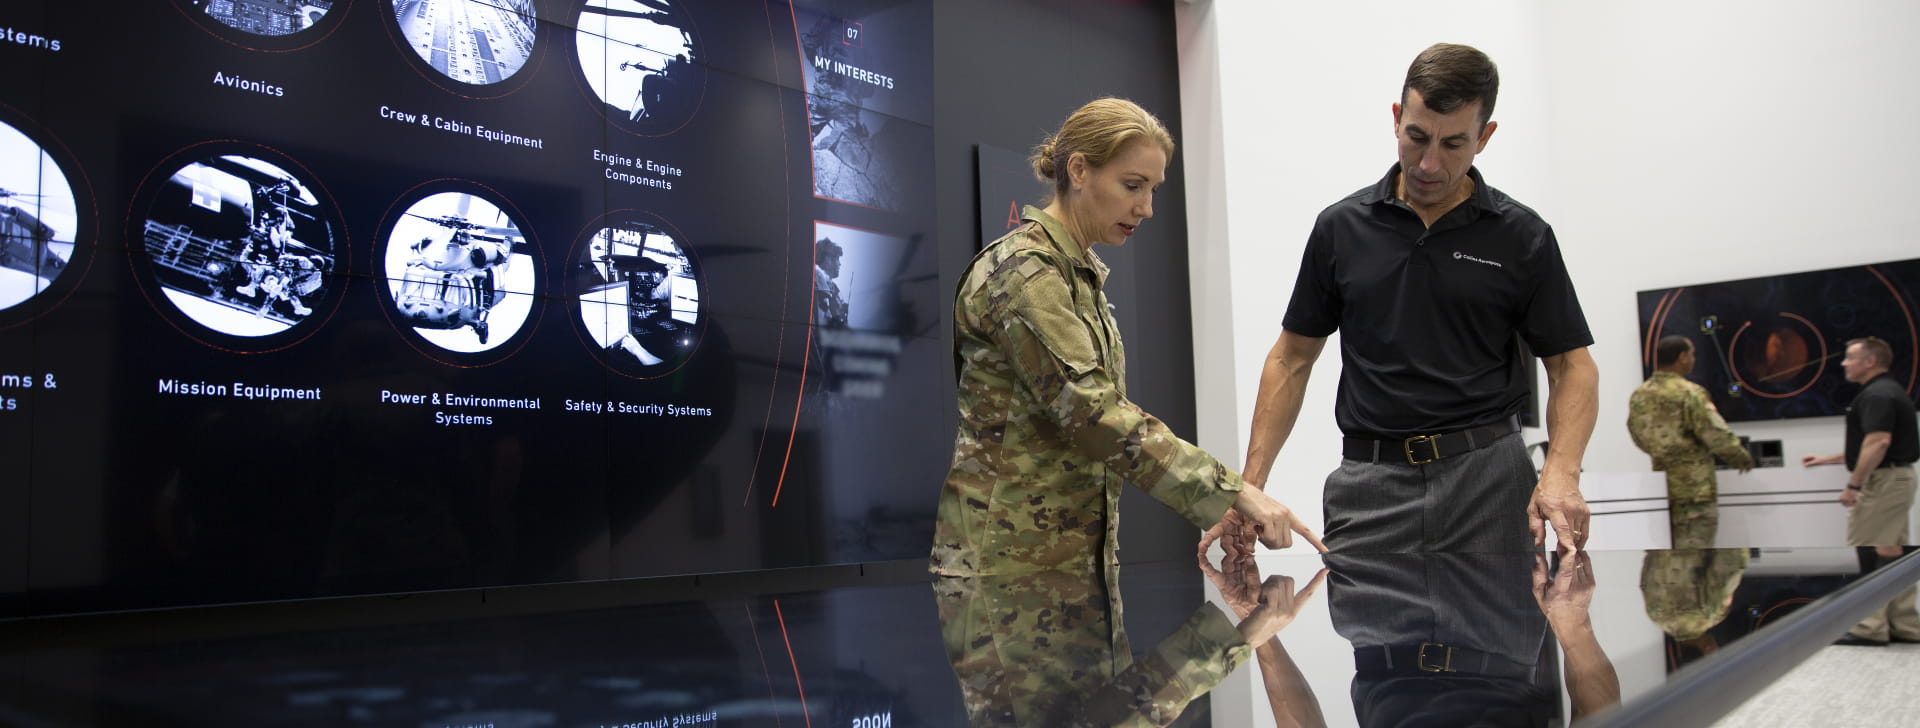 An Army officer conversing with a civilian over an interactive table